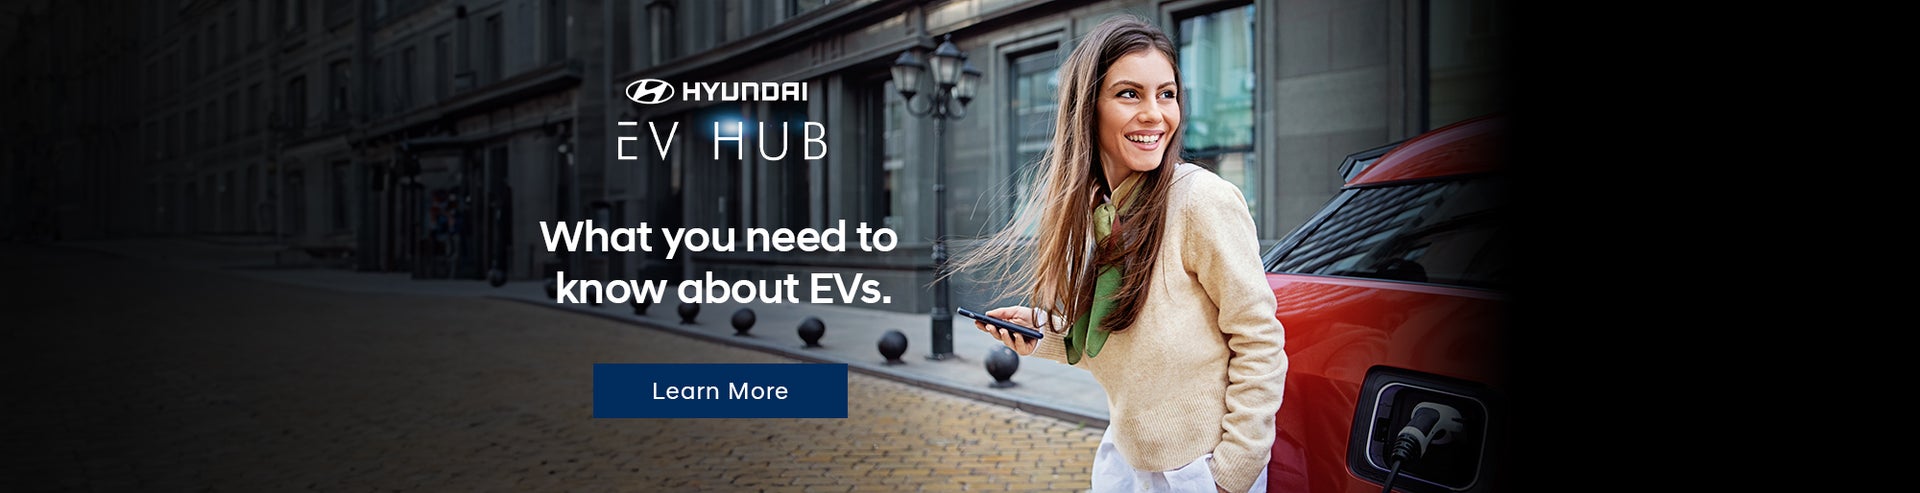 Hyundai EV Hub - What you need to know about EVs.